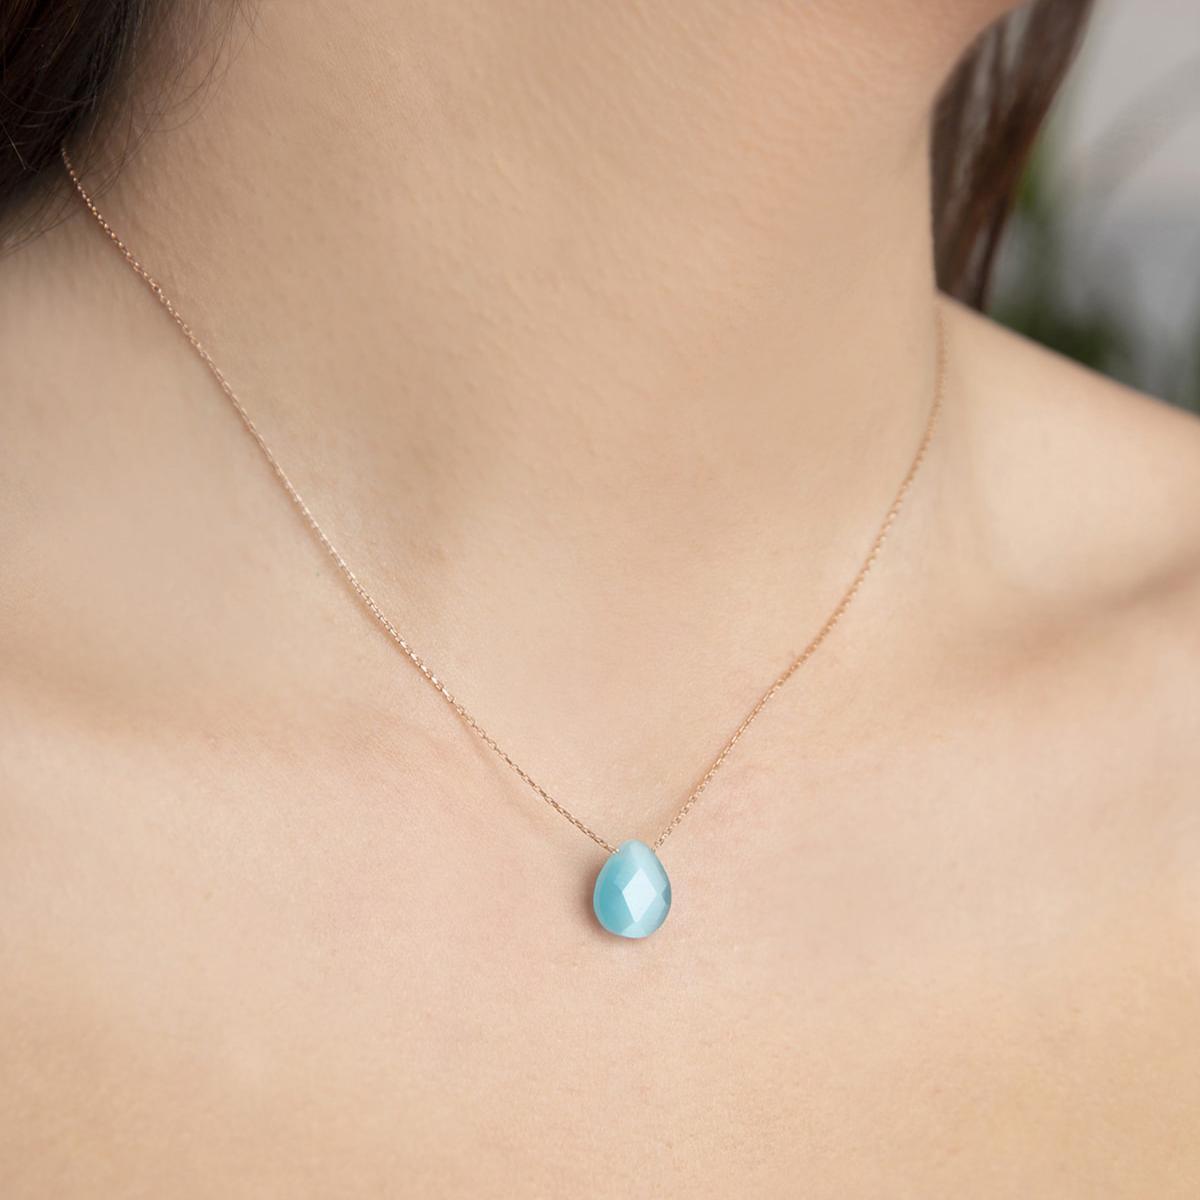 Blue Gemstone Necklace • Blue Opal Necklace • Blue Necklace Pendant - Trending Silver Gifts